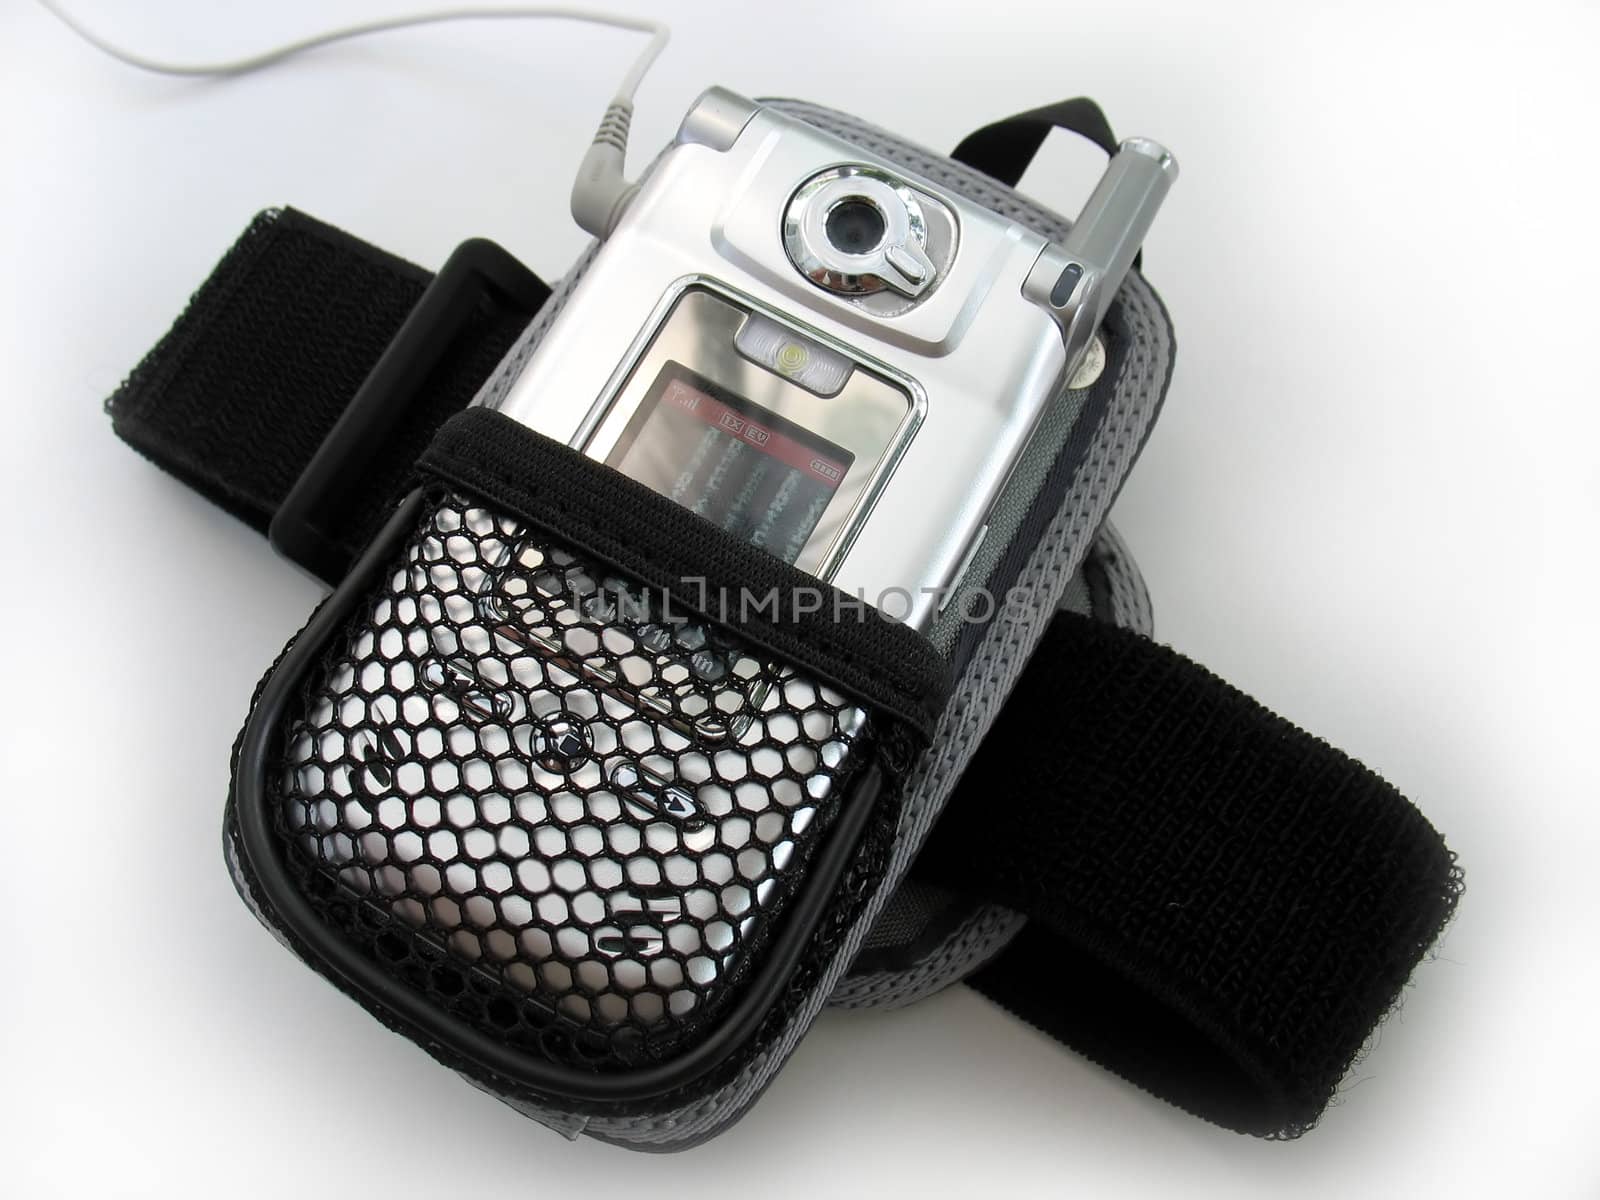 An armband / holster for a cell phone that plays mp3's.